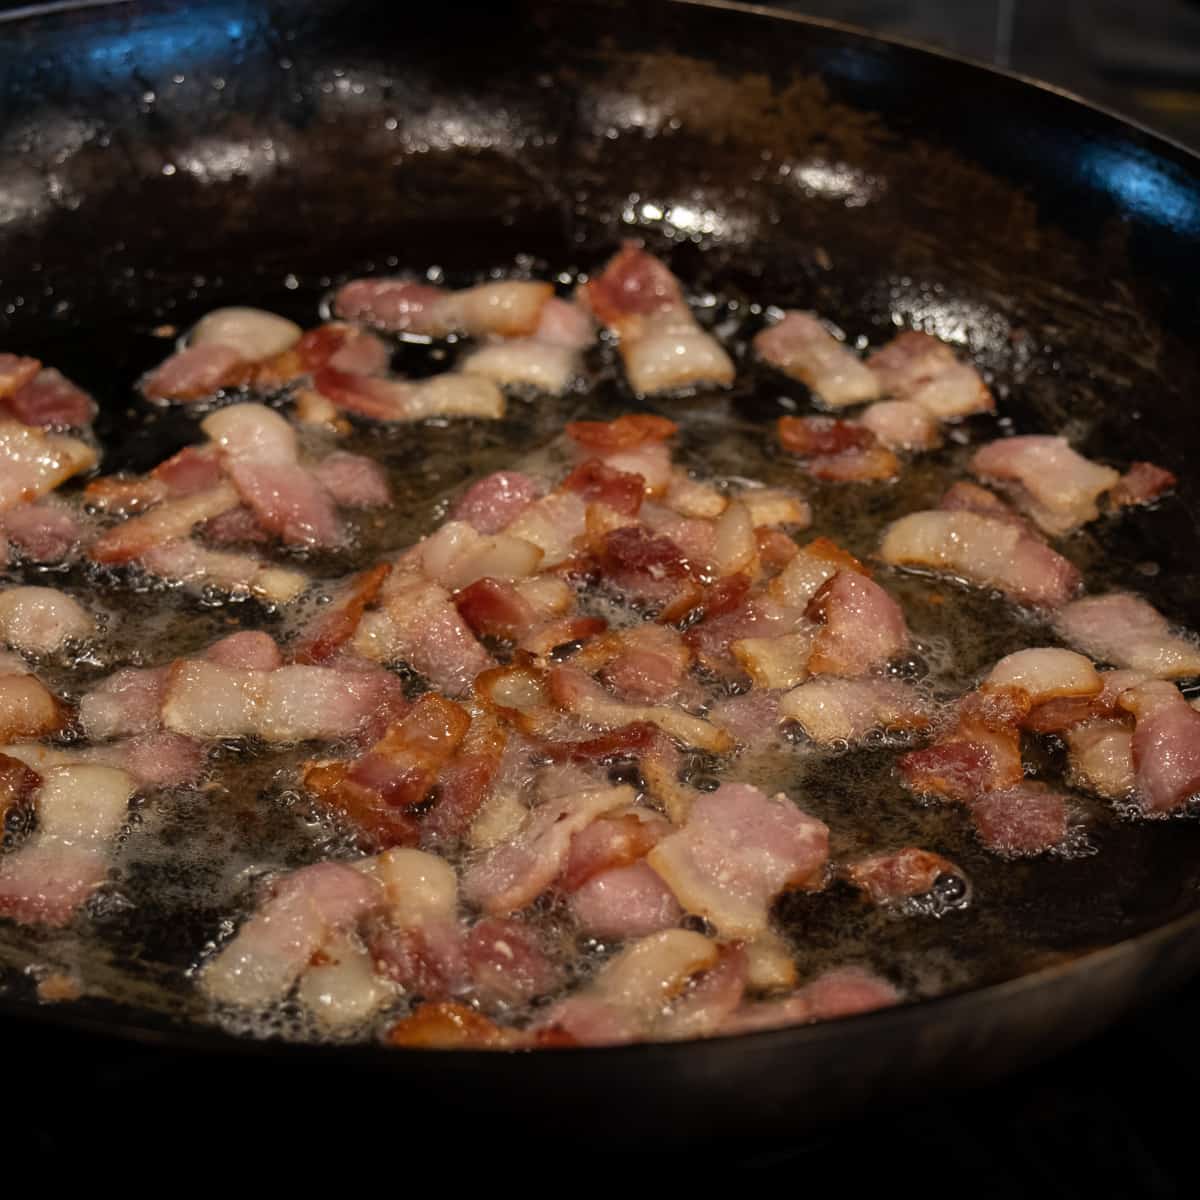 Chopped pieces of bacon frying in a skillet.